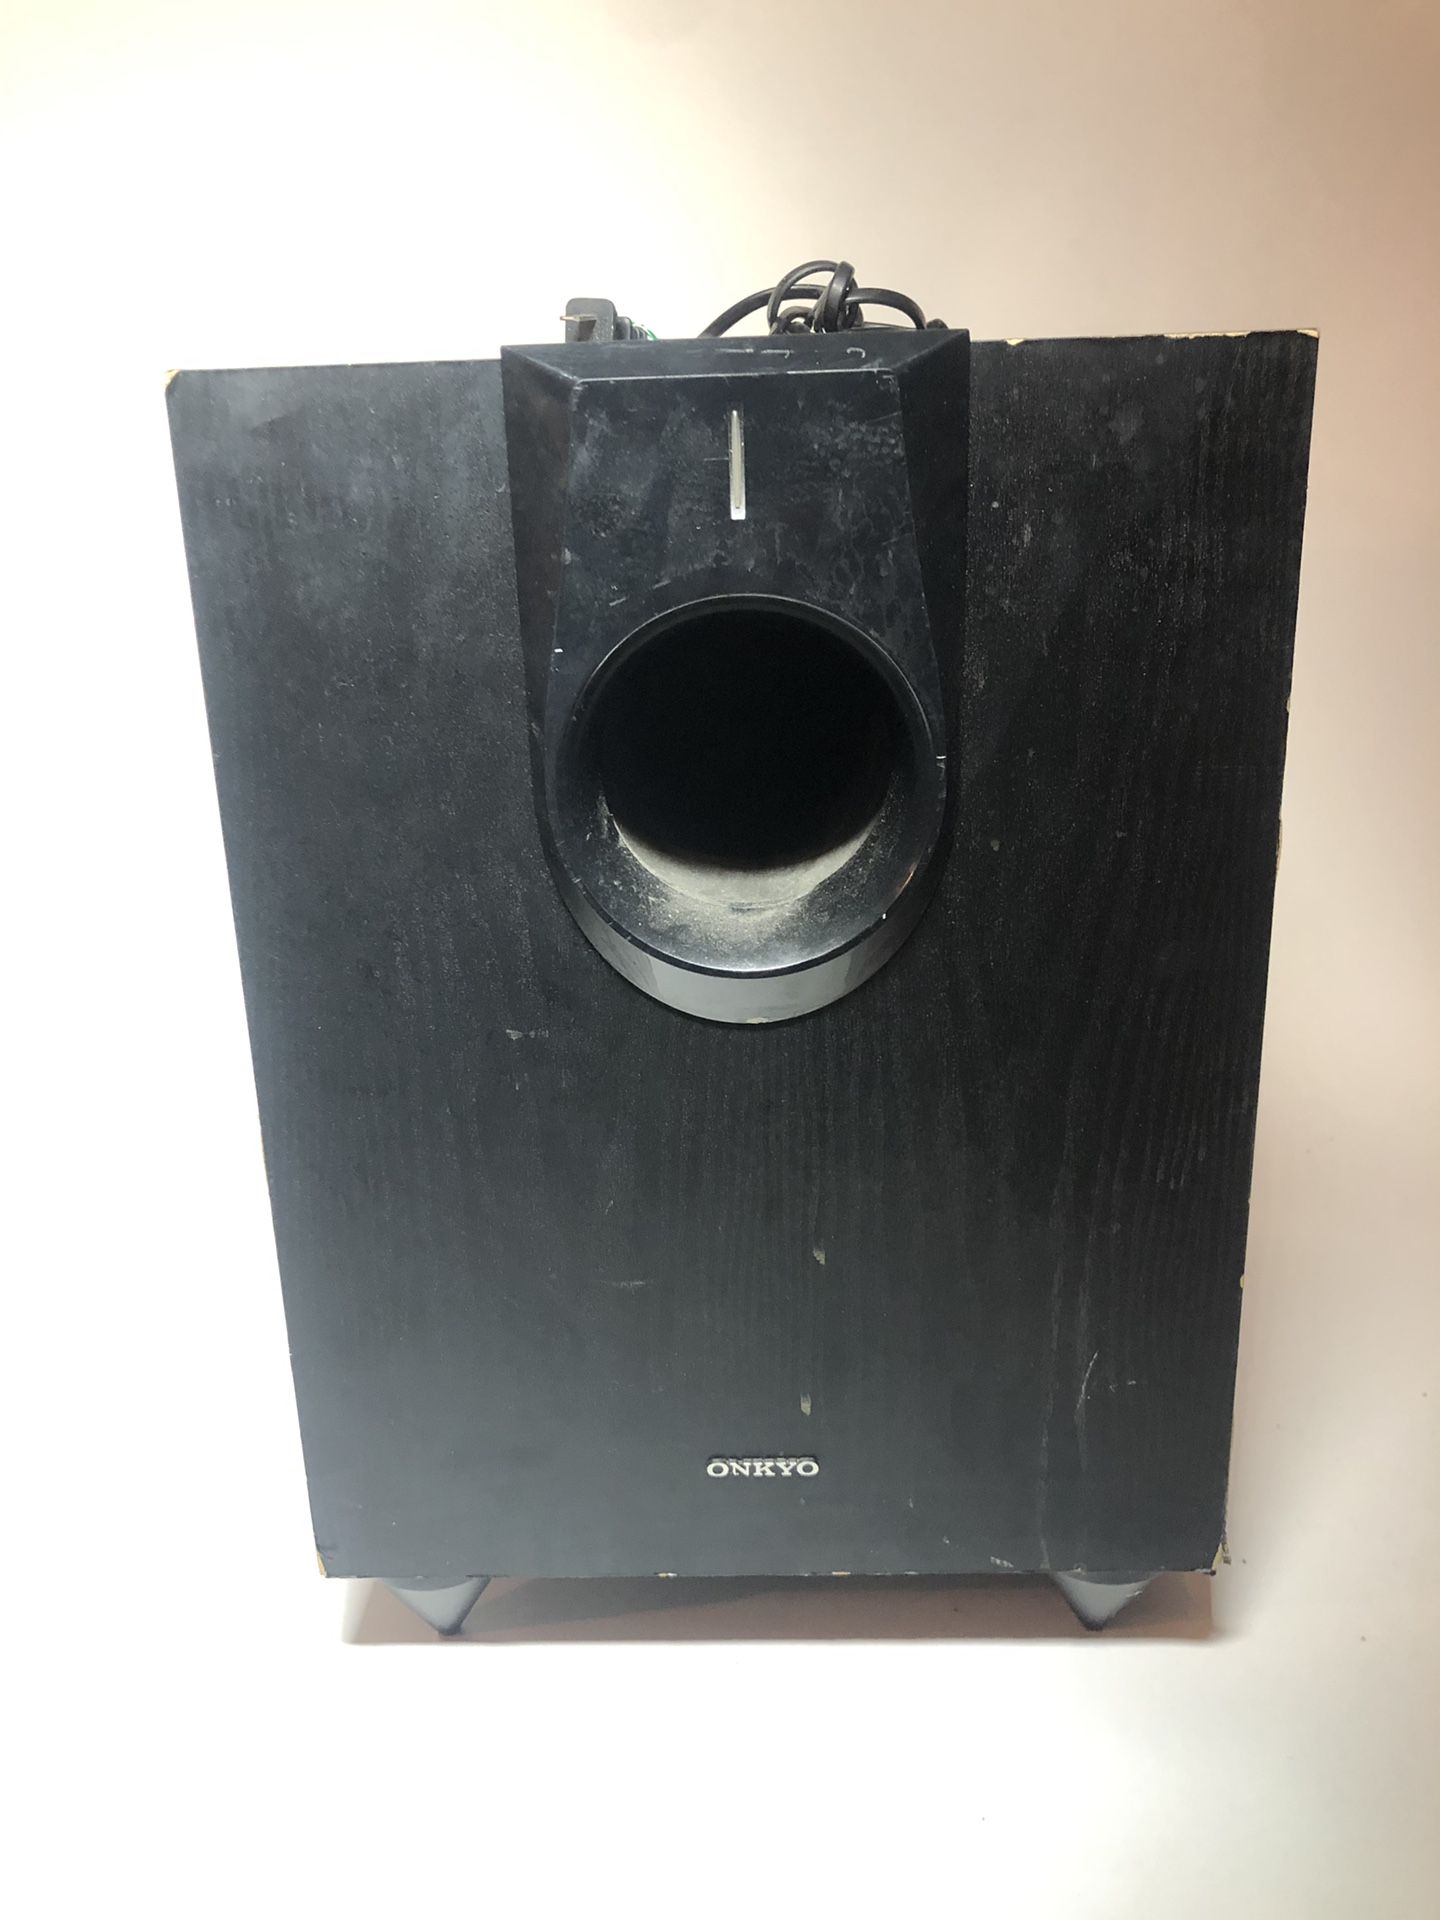 Onkyo powered subwoofer model no SKW-580 120volts